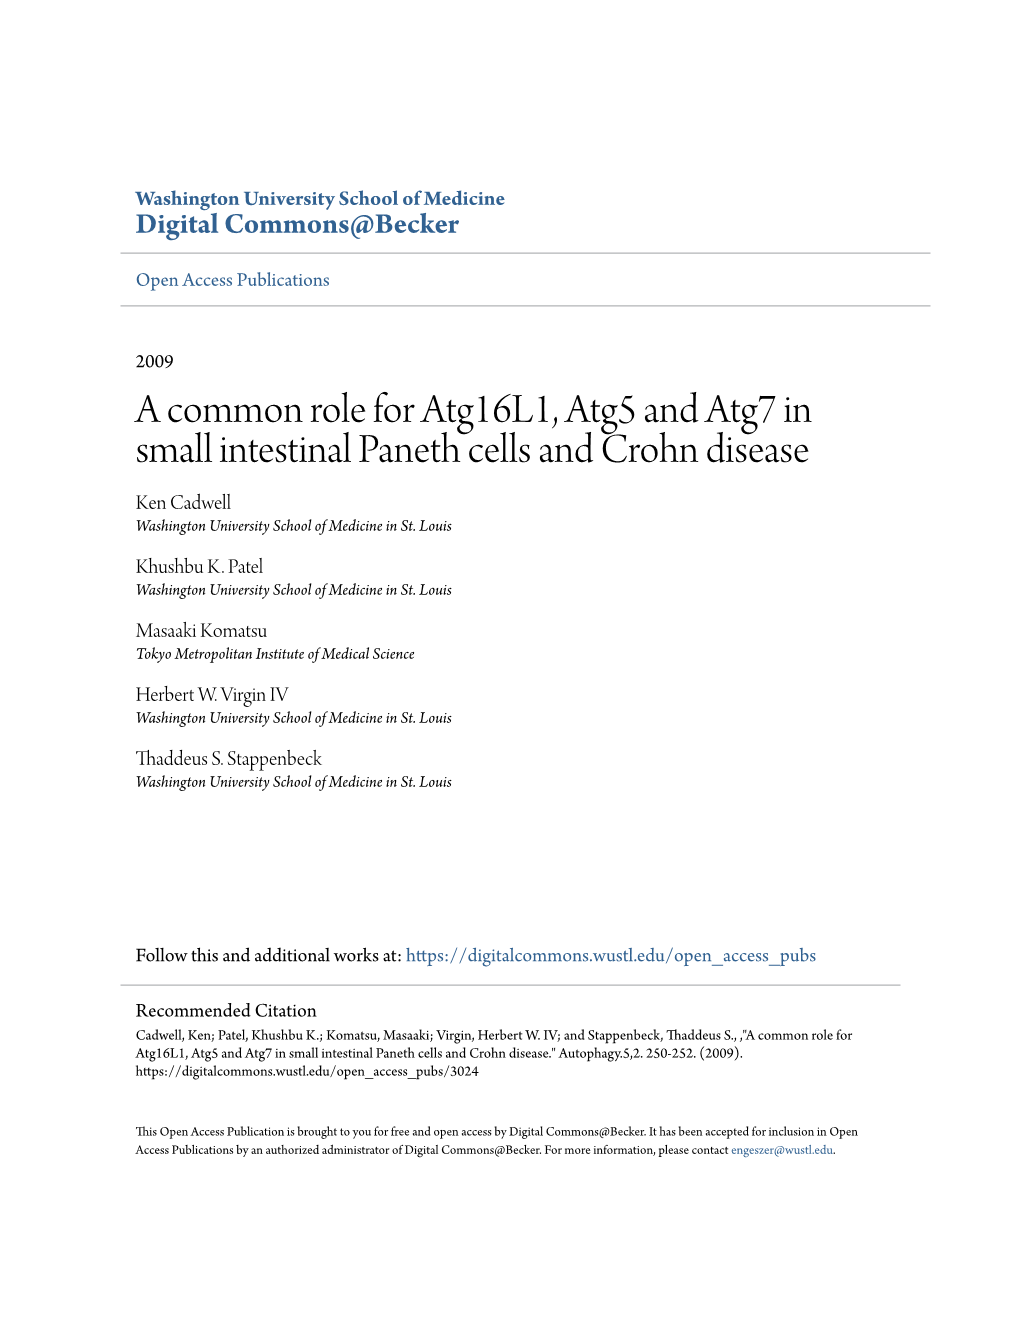 A Common Role for Atg16l1, Atg5 and Atg7 in Small Intestinal Paneth Cells and Crohn Disease Ken Cadwell Washington University School of Medicine in St